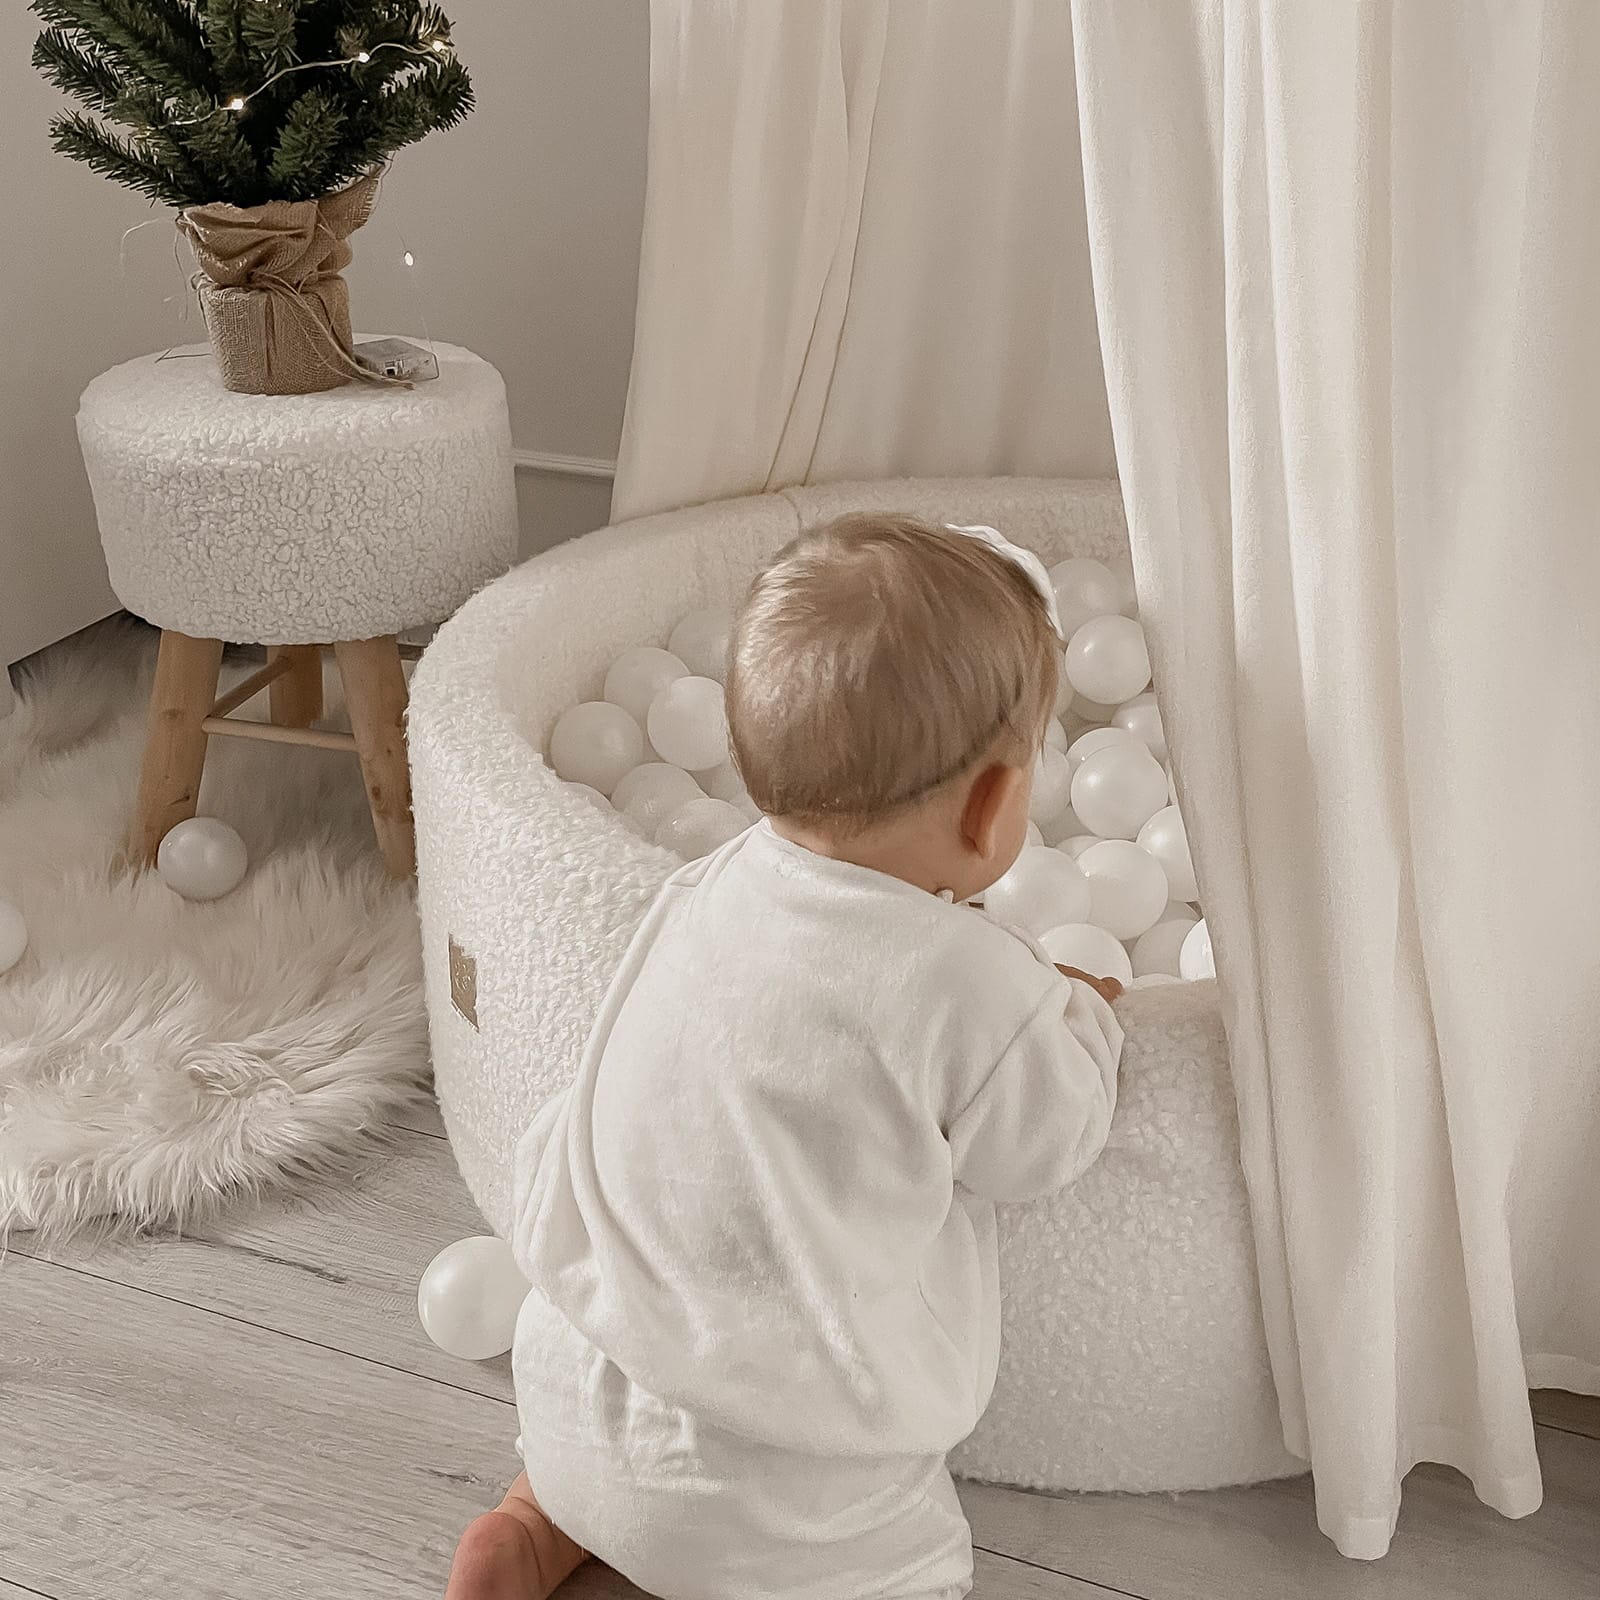 Luxury Boucle Round Ball Pit - White For Kids By MeowBaby - Stylemykid.com